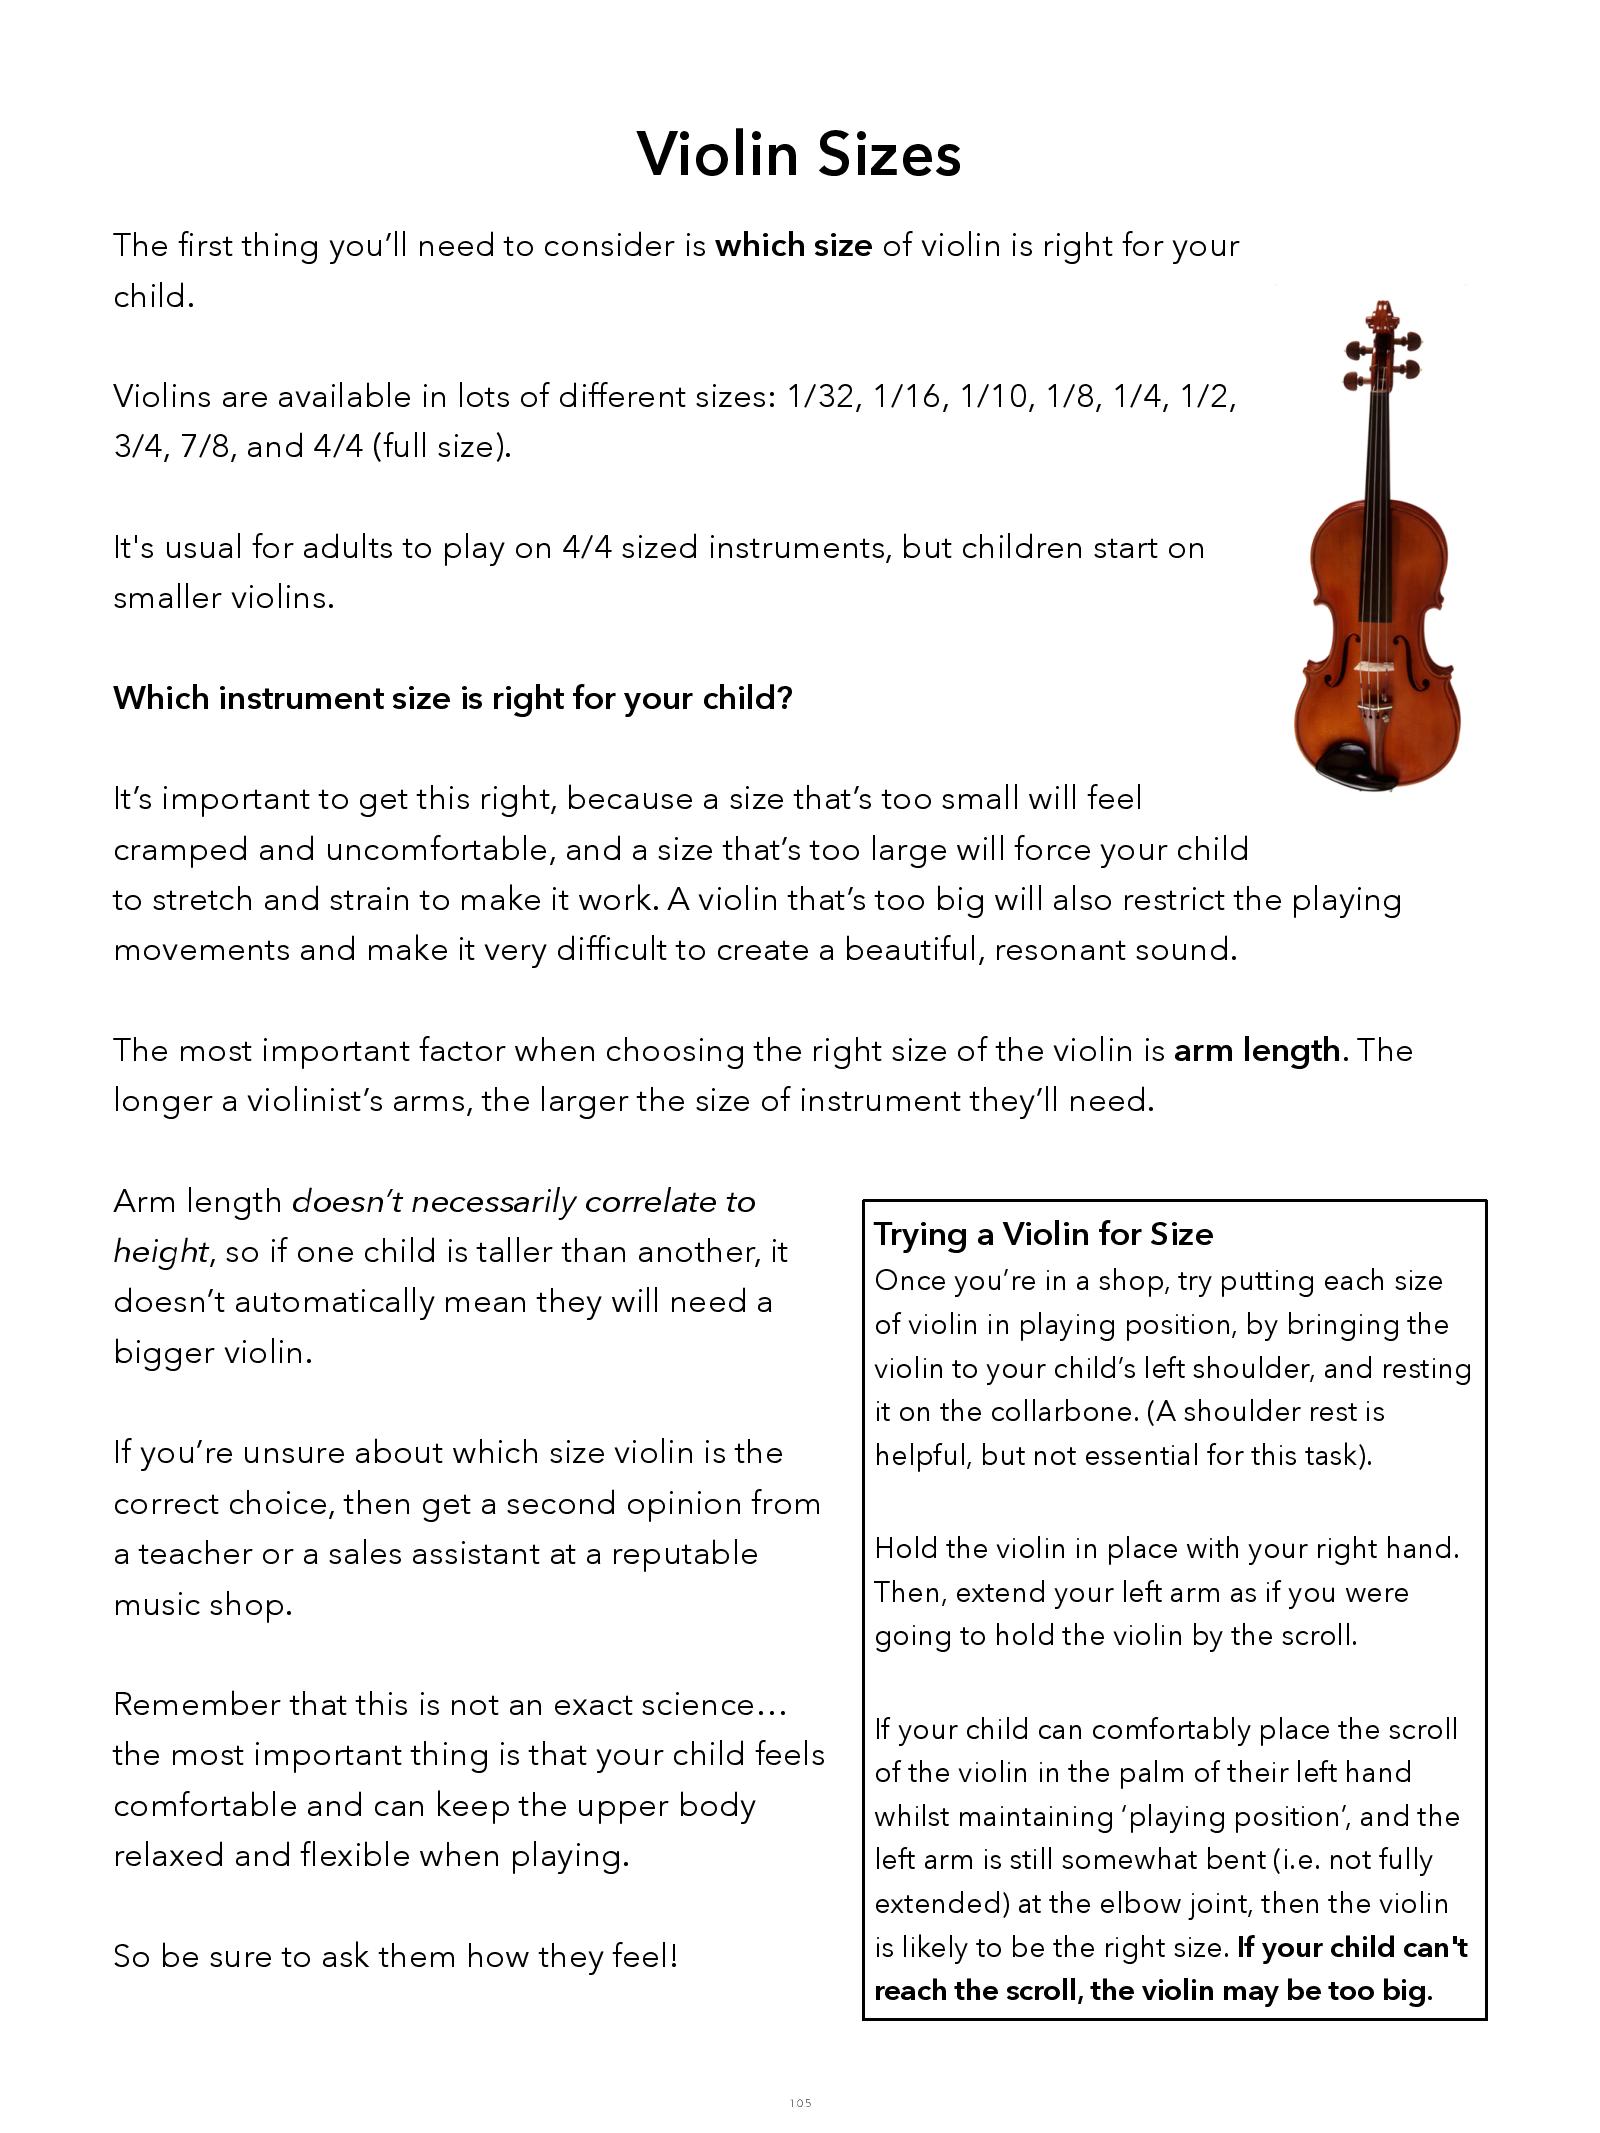 https://www.violinschool.com/wp-content/uploads/2020/12/Violin-Sizes-How-To-Get-Started-With-The-Violin-1.2.1-ViolinSchool.pdf